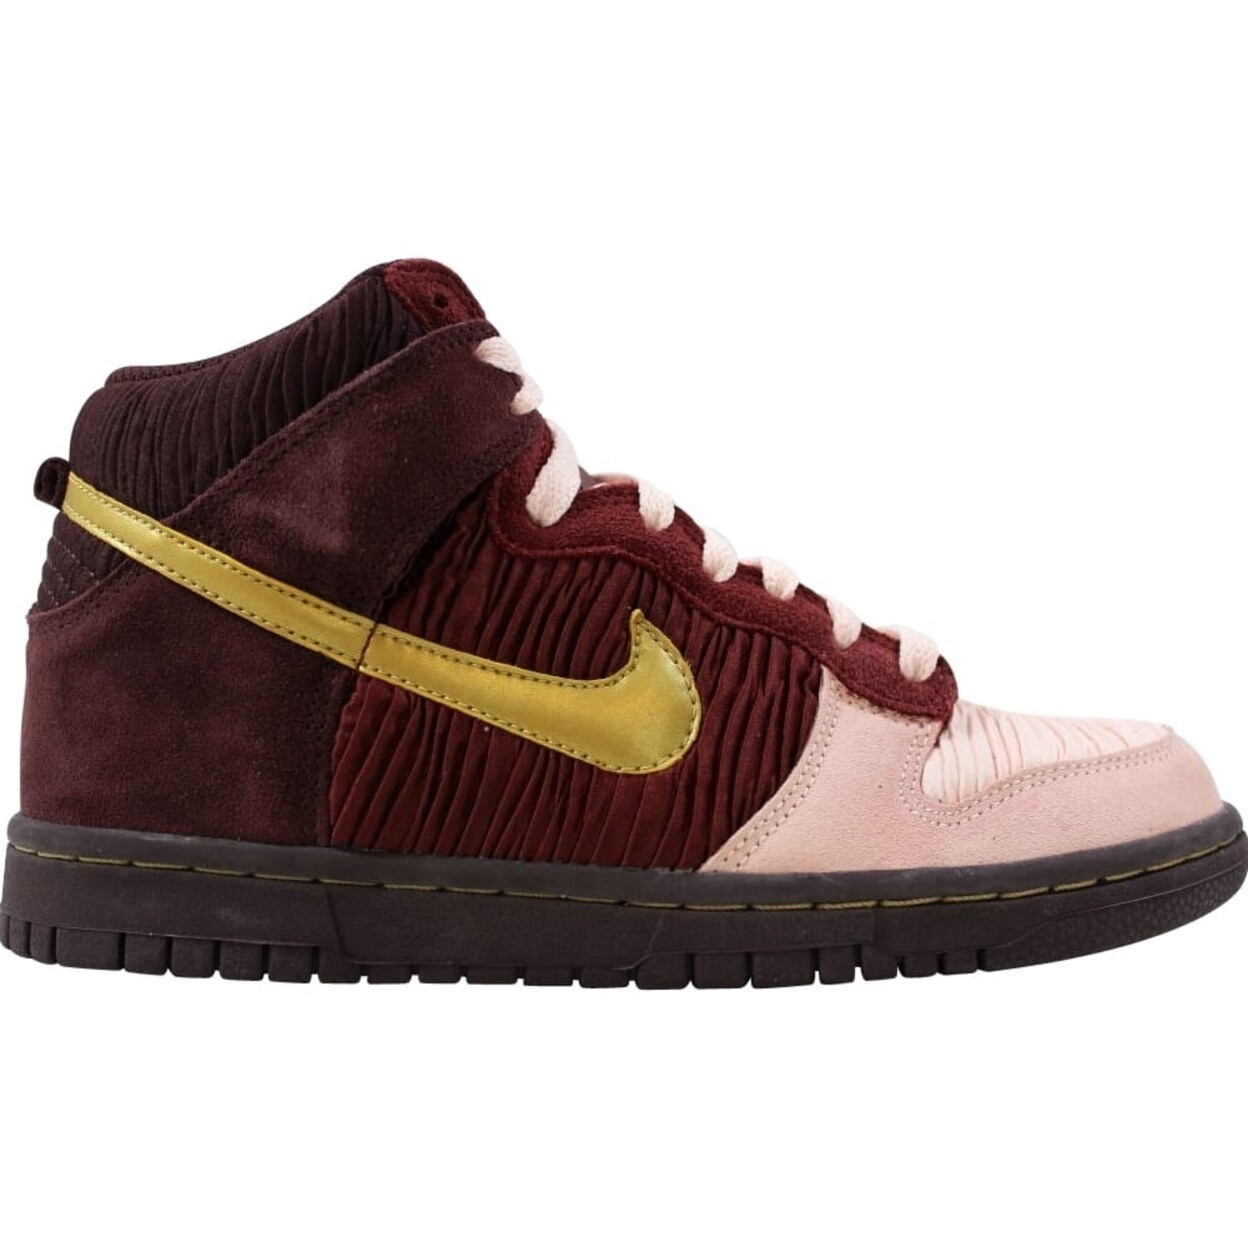 burgundy and gold nikes